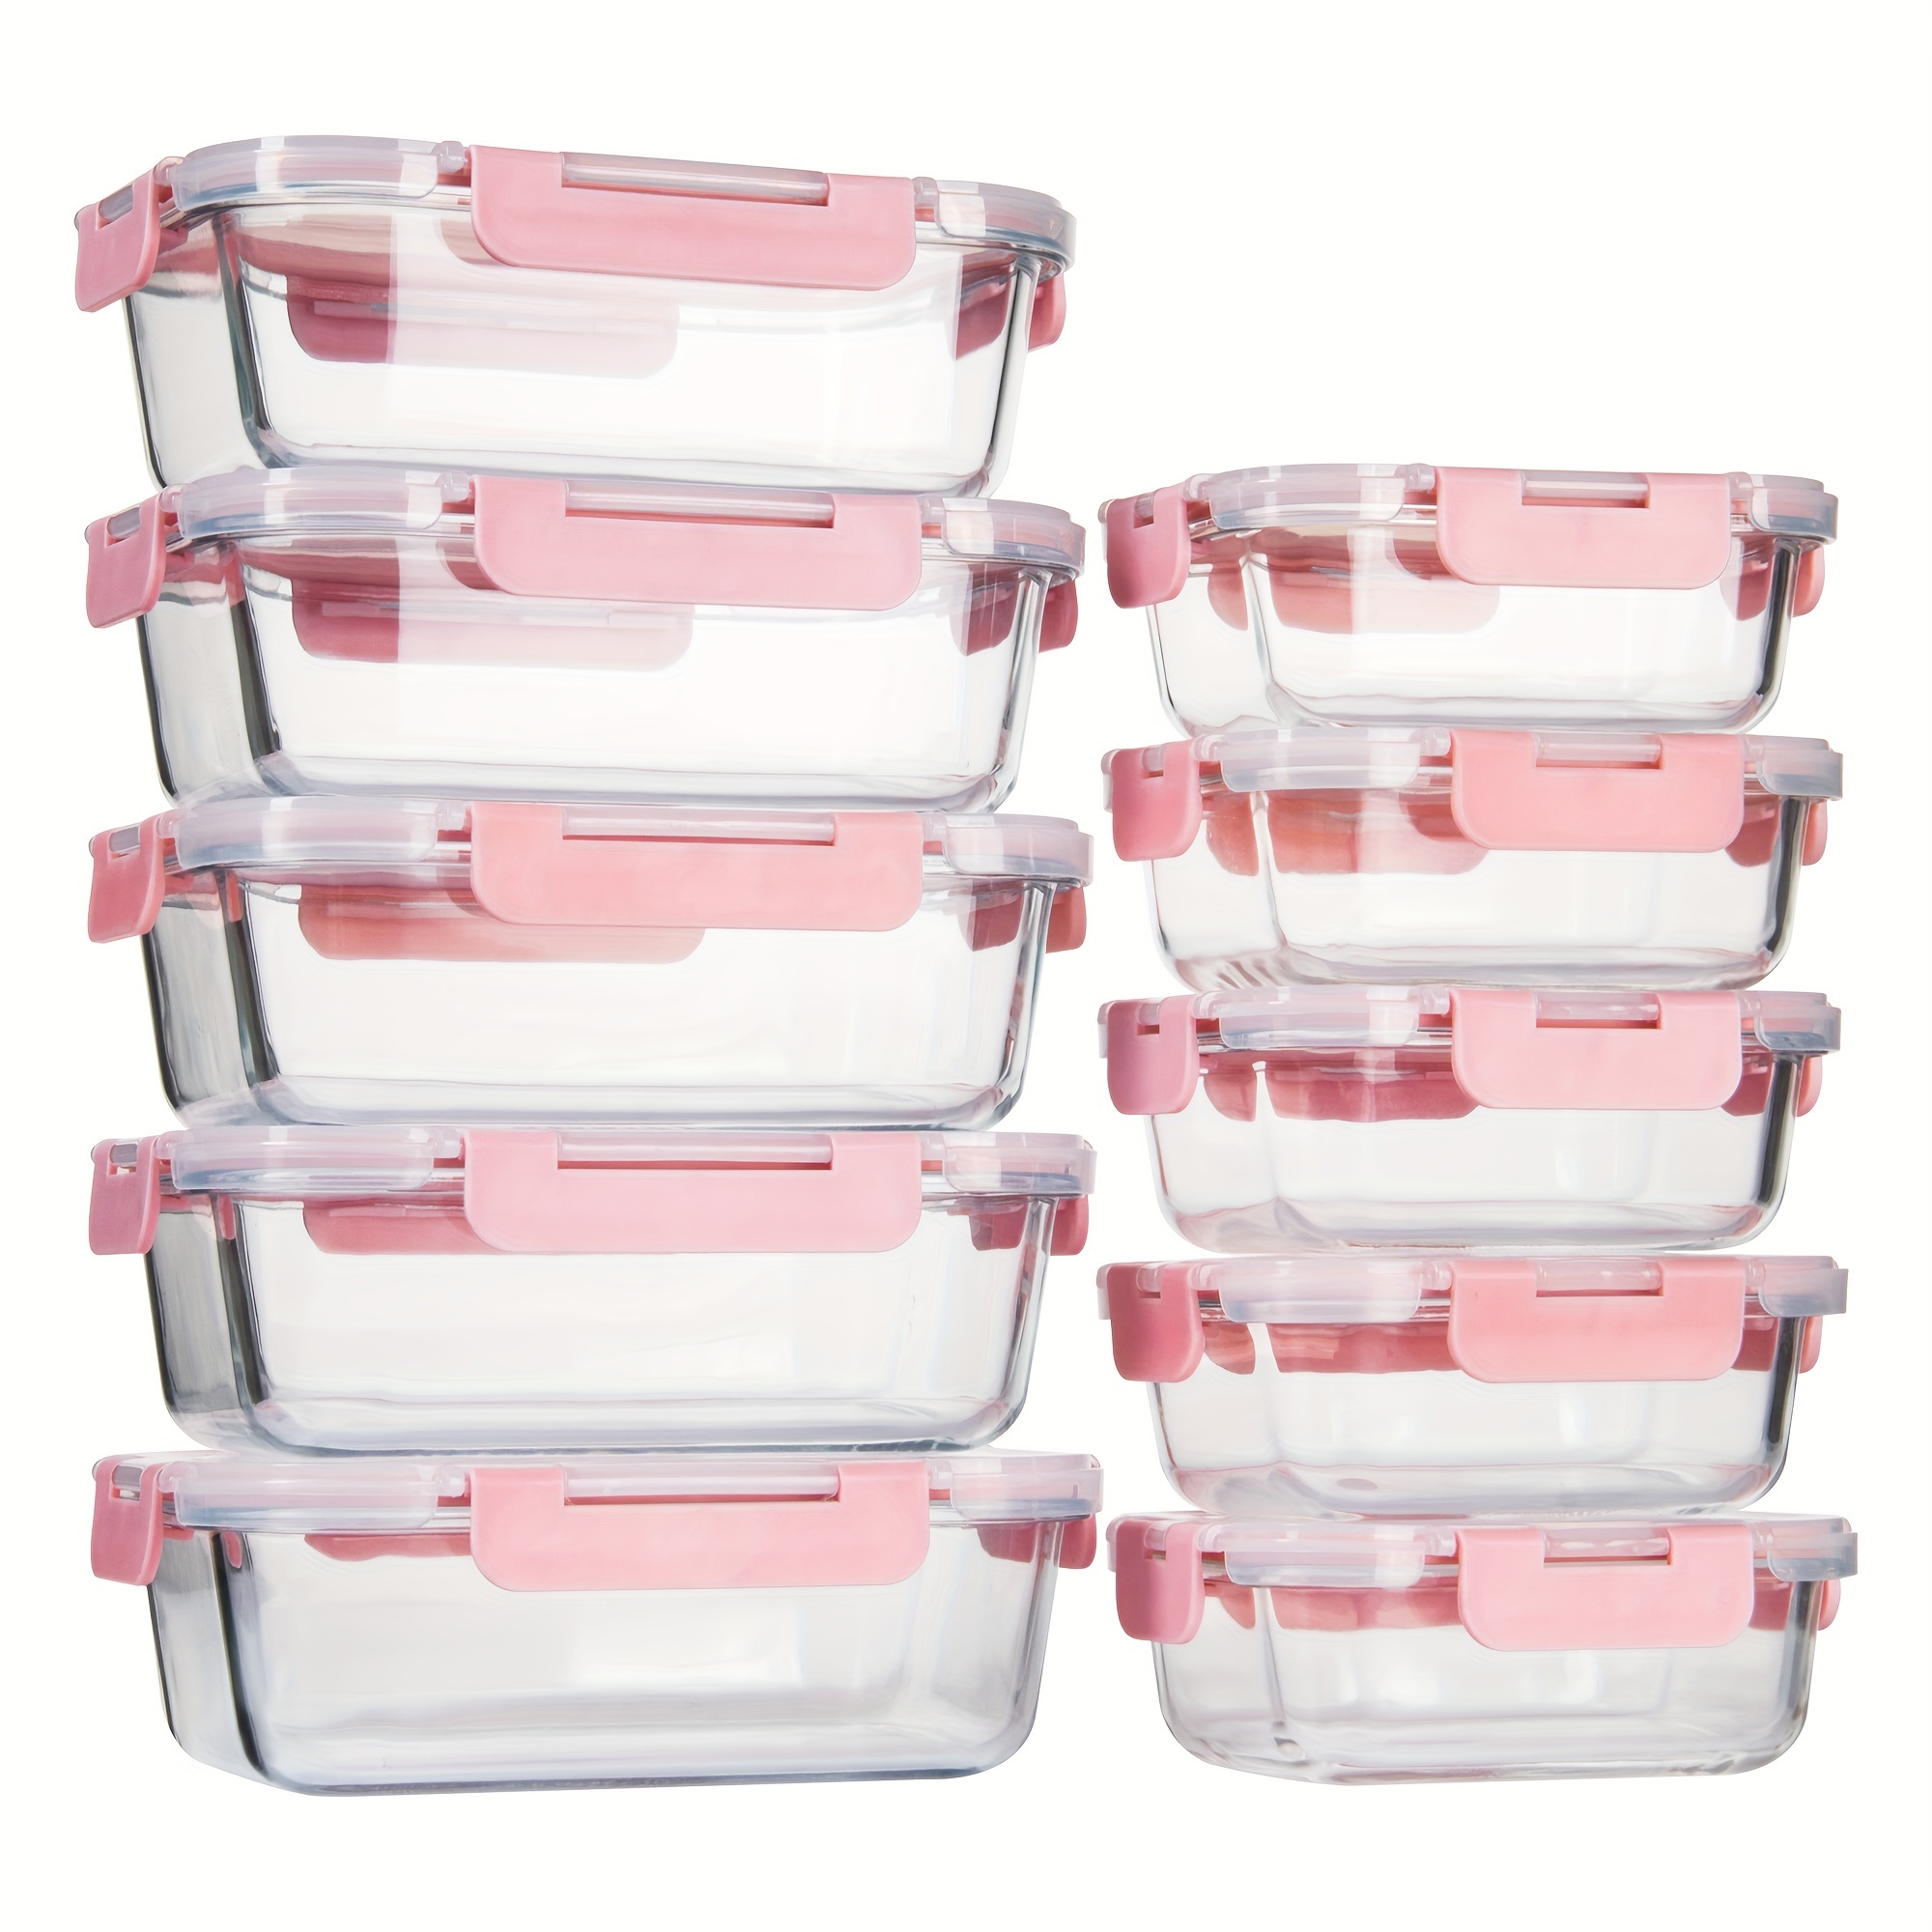 

[10-pack] Glass Meal Prep Containers Set, Food Storage Containers With Airtight Lids, Glass Lunch Boxes For Home Kitchen Office Lunch, Pink